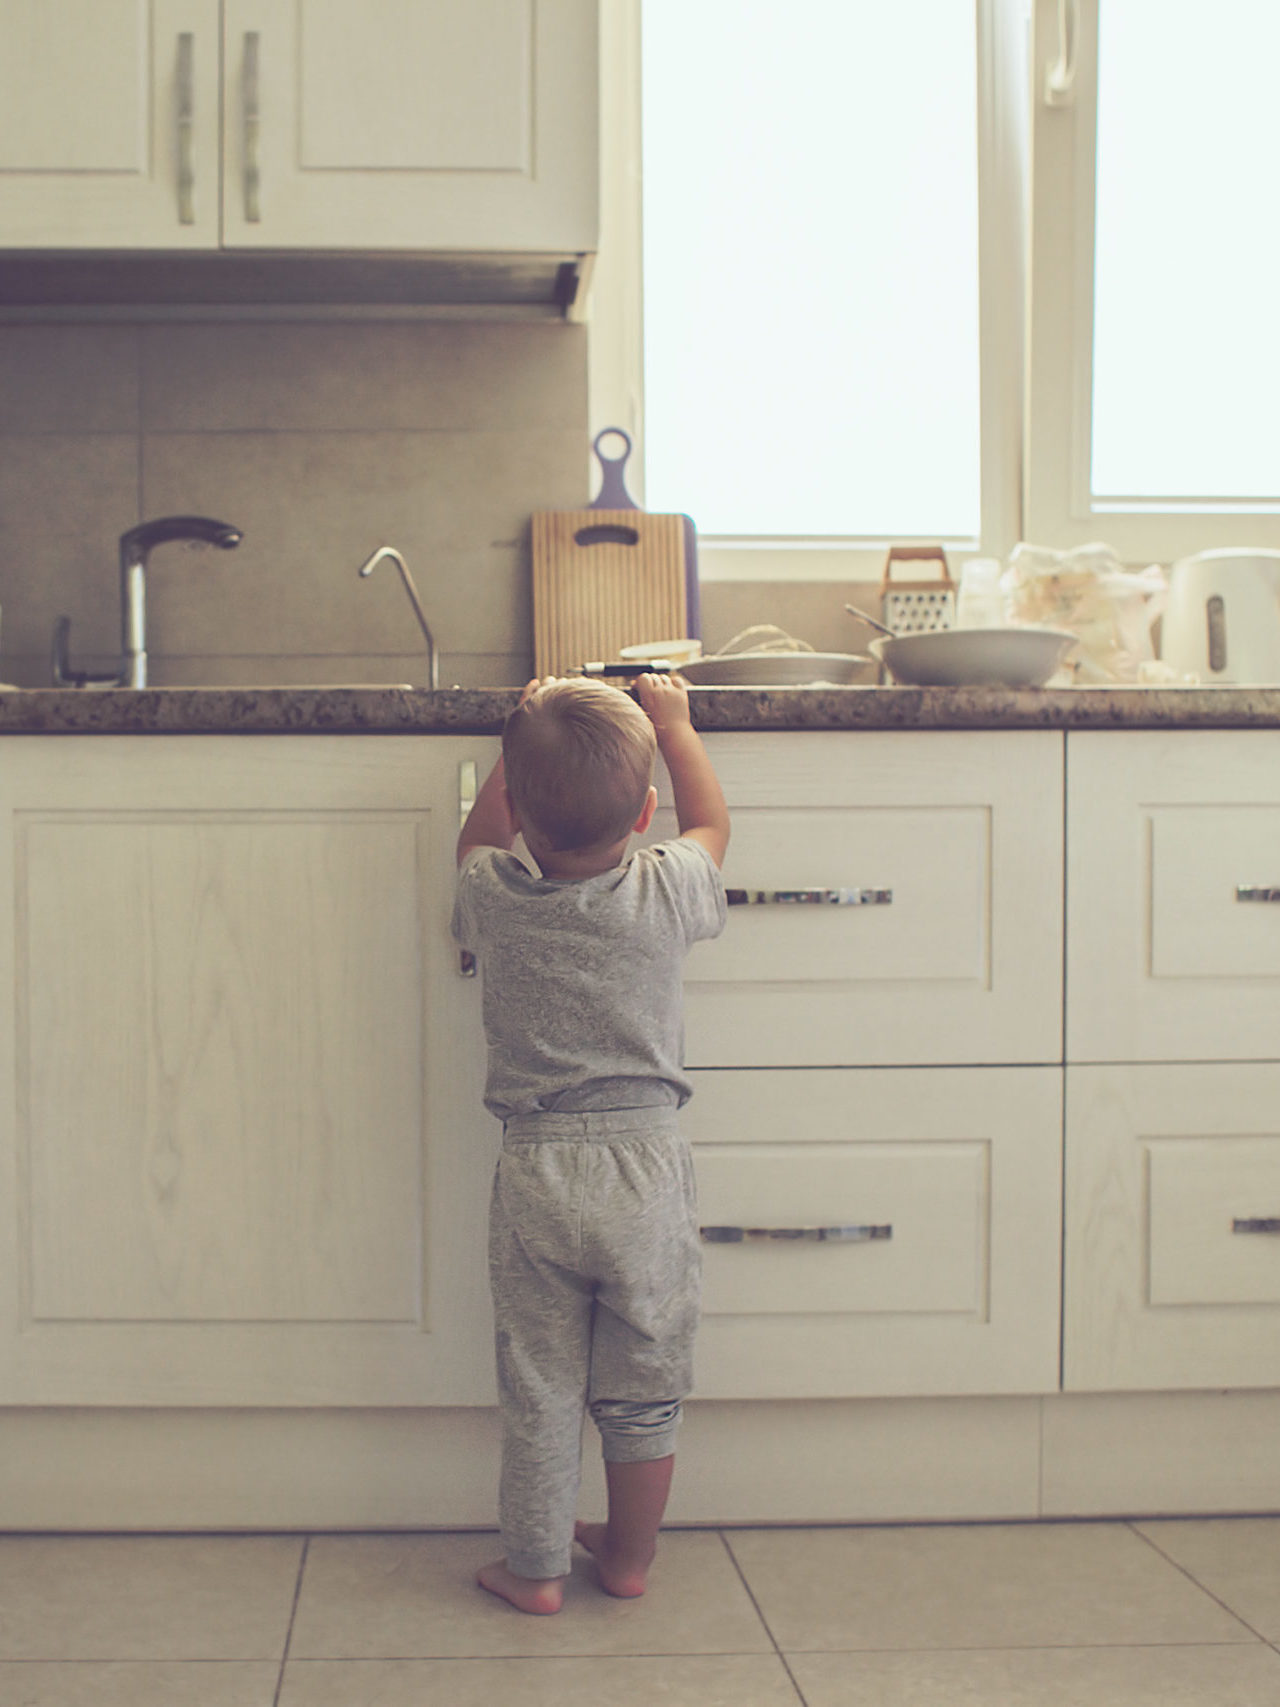 Important Safety Tips for Every Home with Kids - Simply Maid